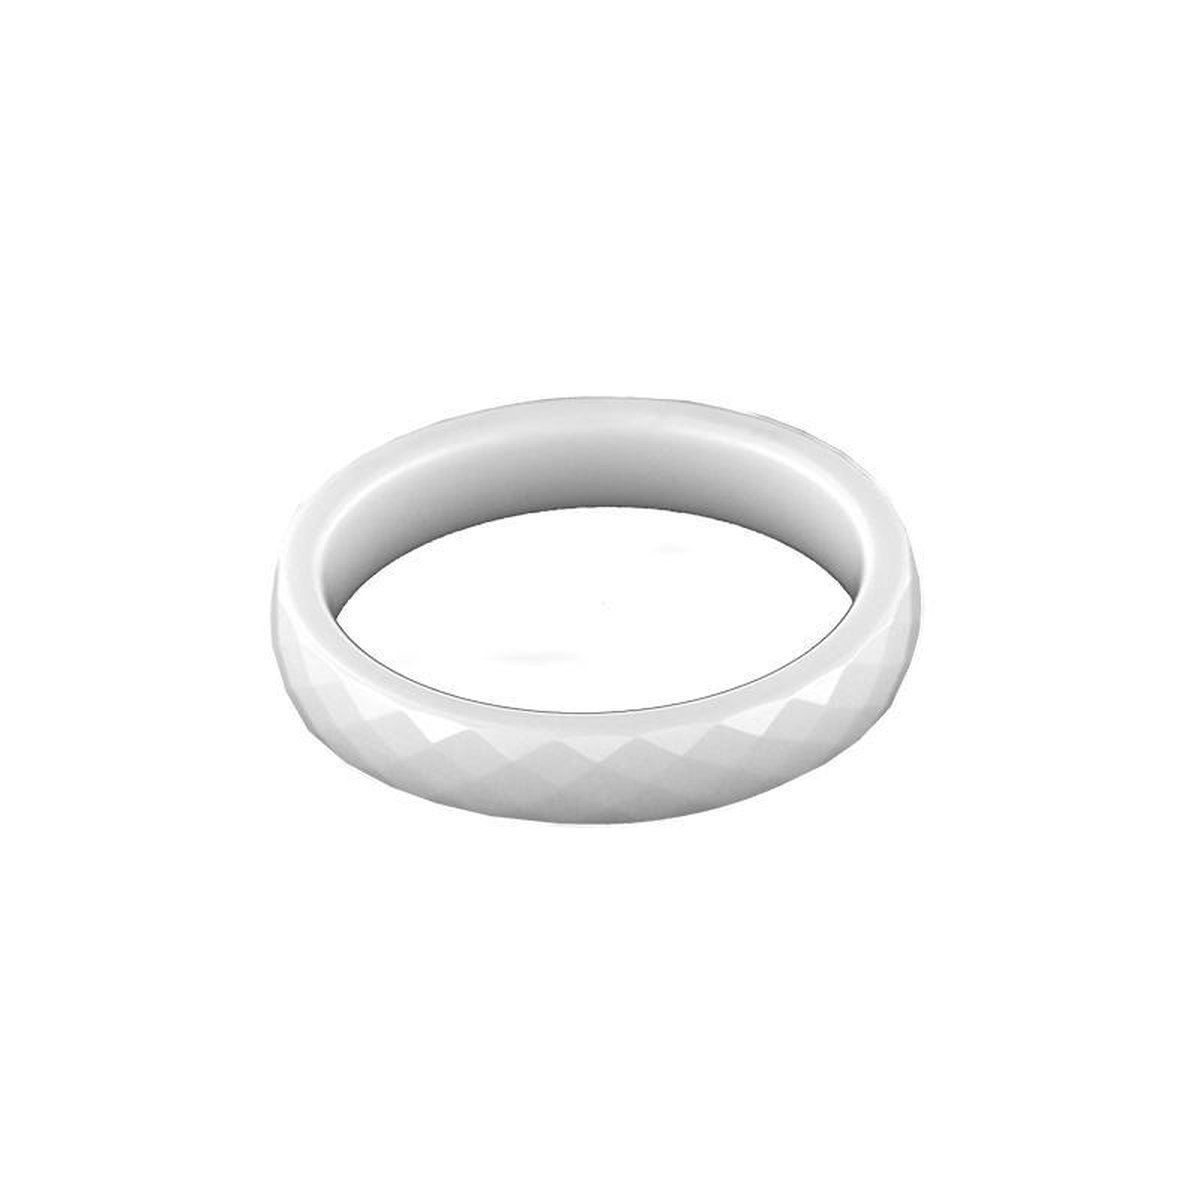 MY iMenso ring ceramic white faceted size 56 mt 17 3/4